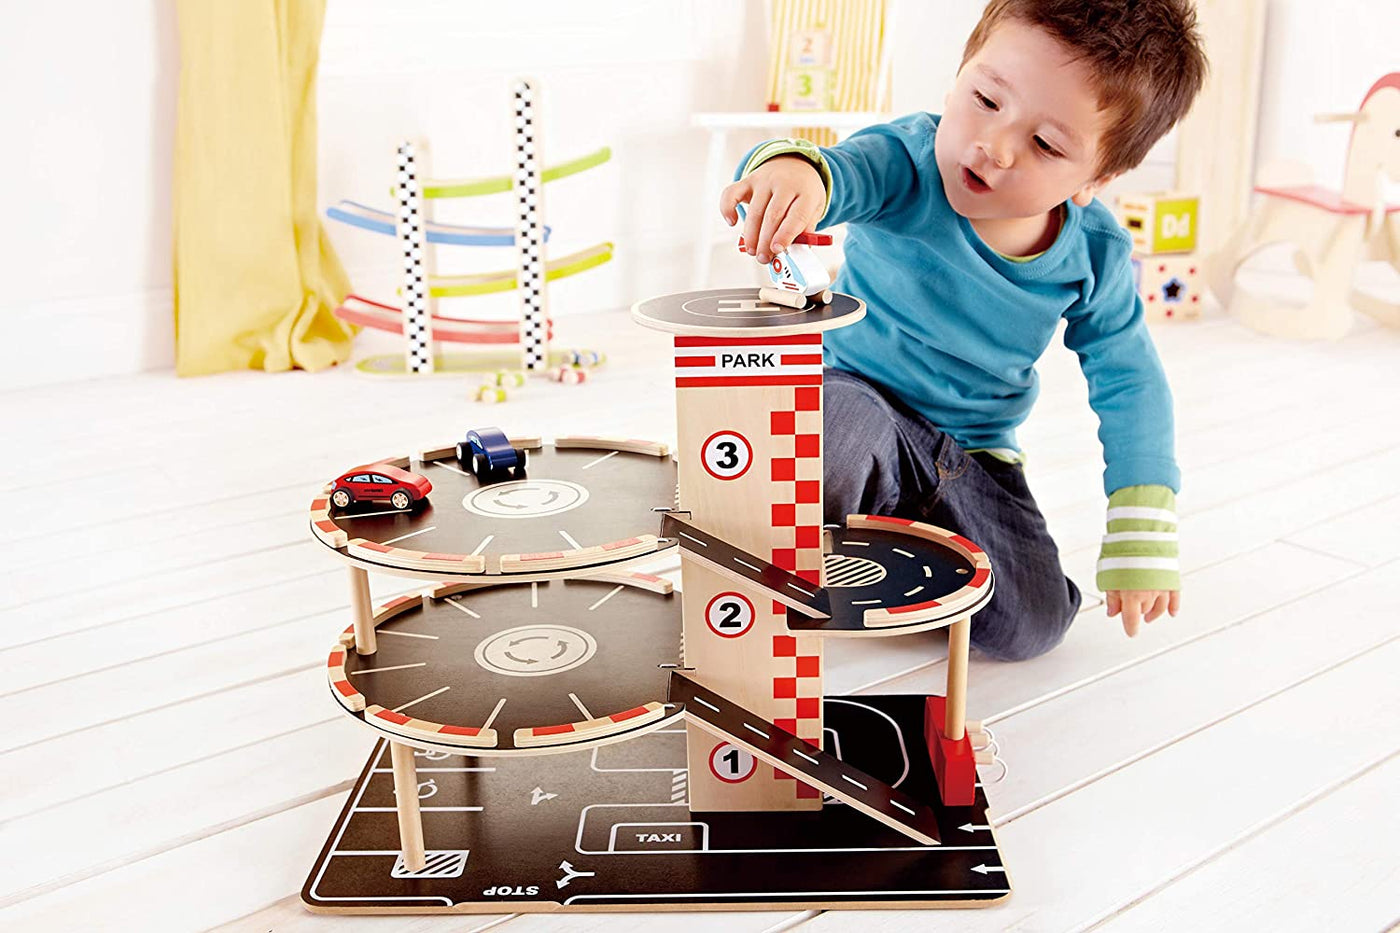 Park and Go Garage - Hape by Hape Toys, Germany Toy